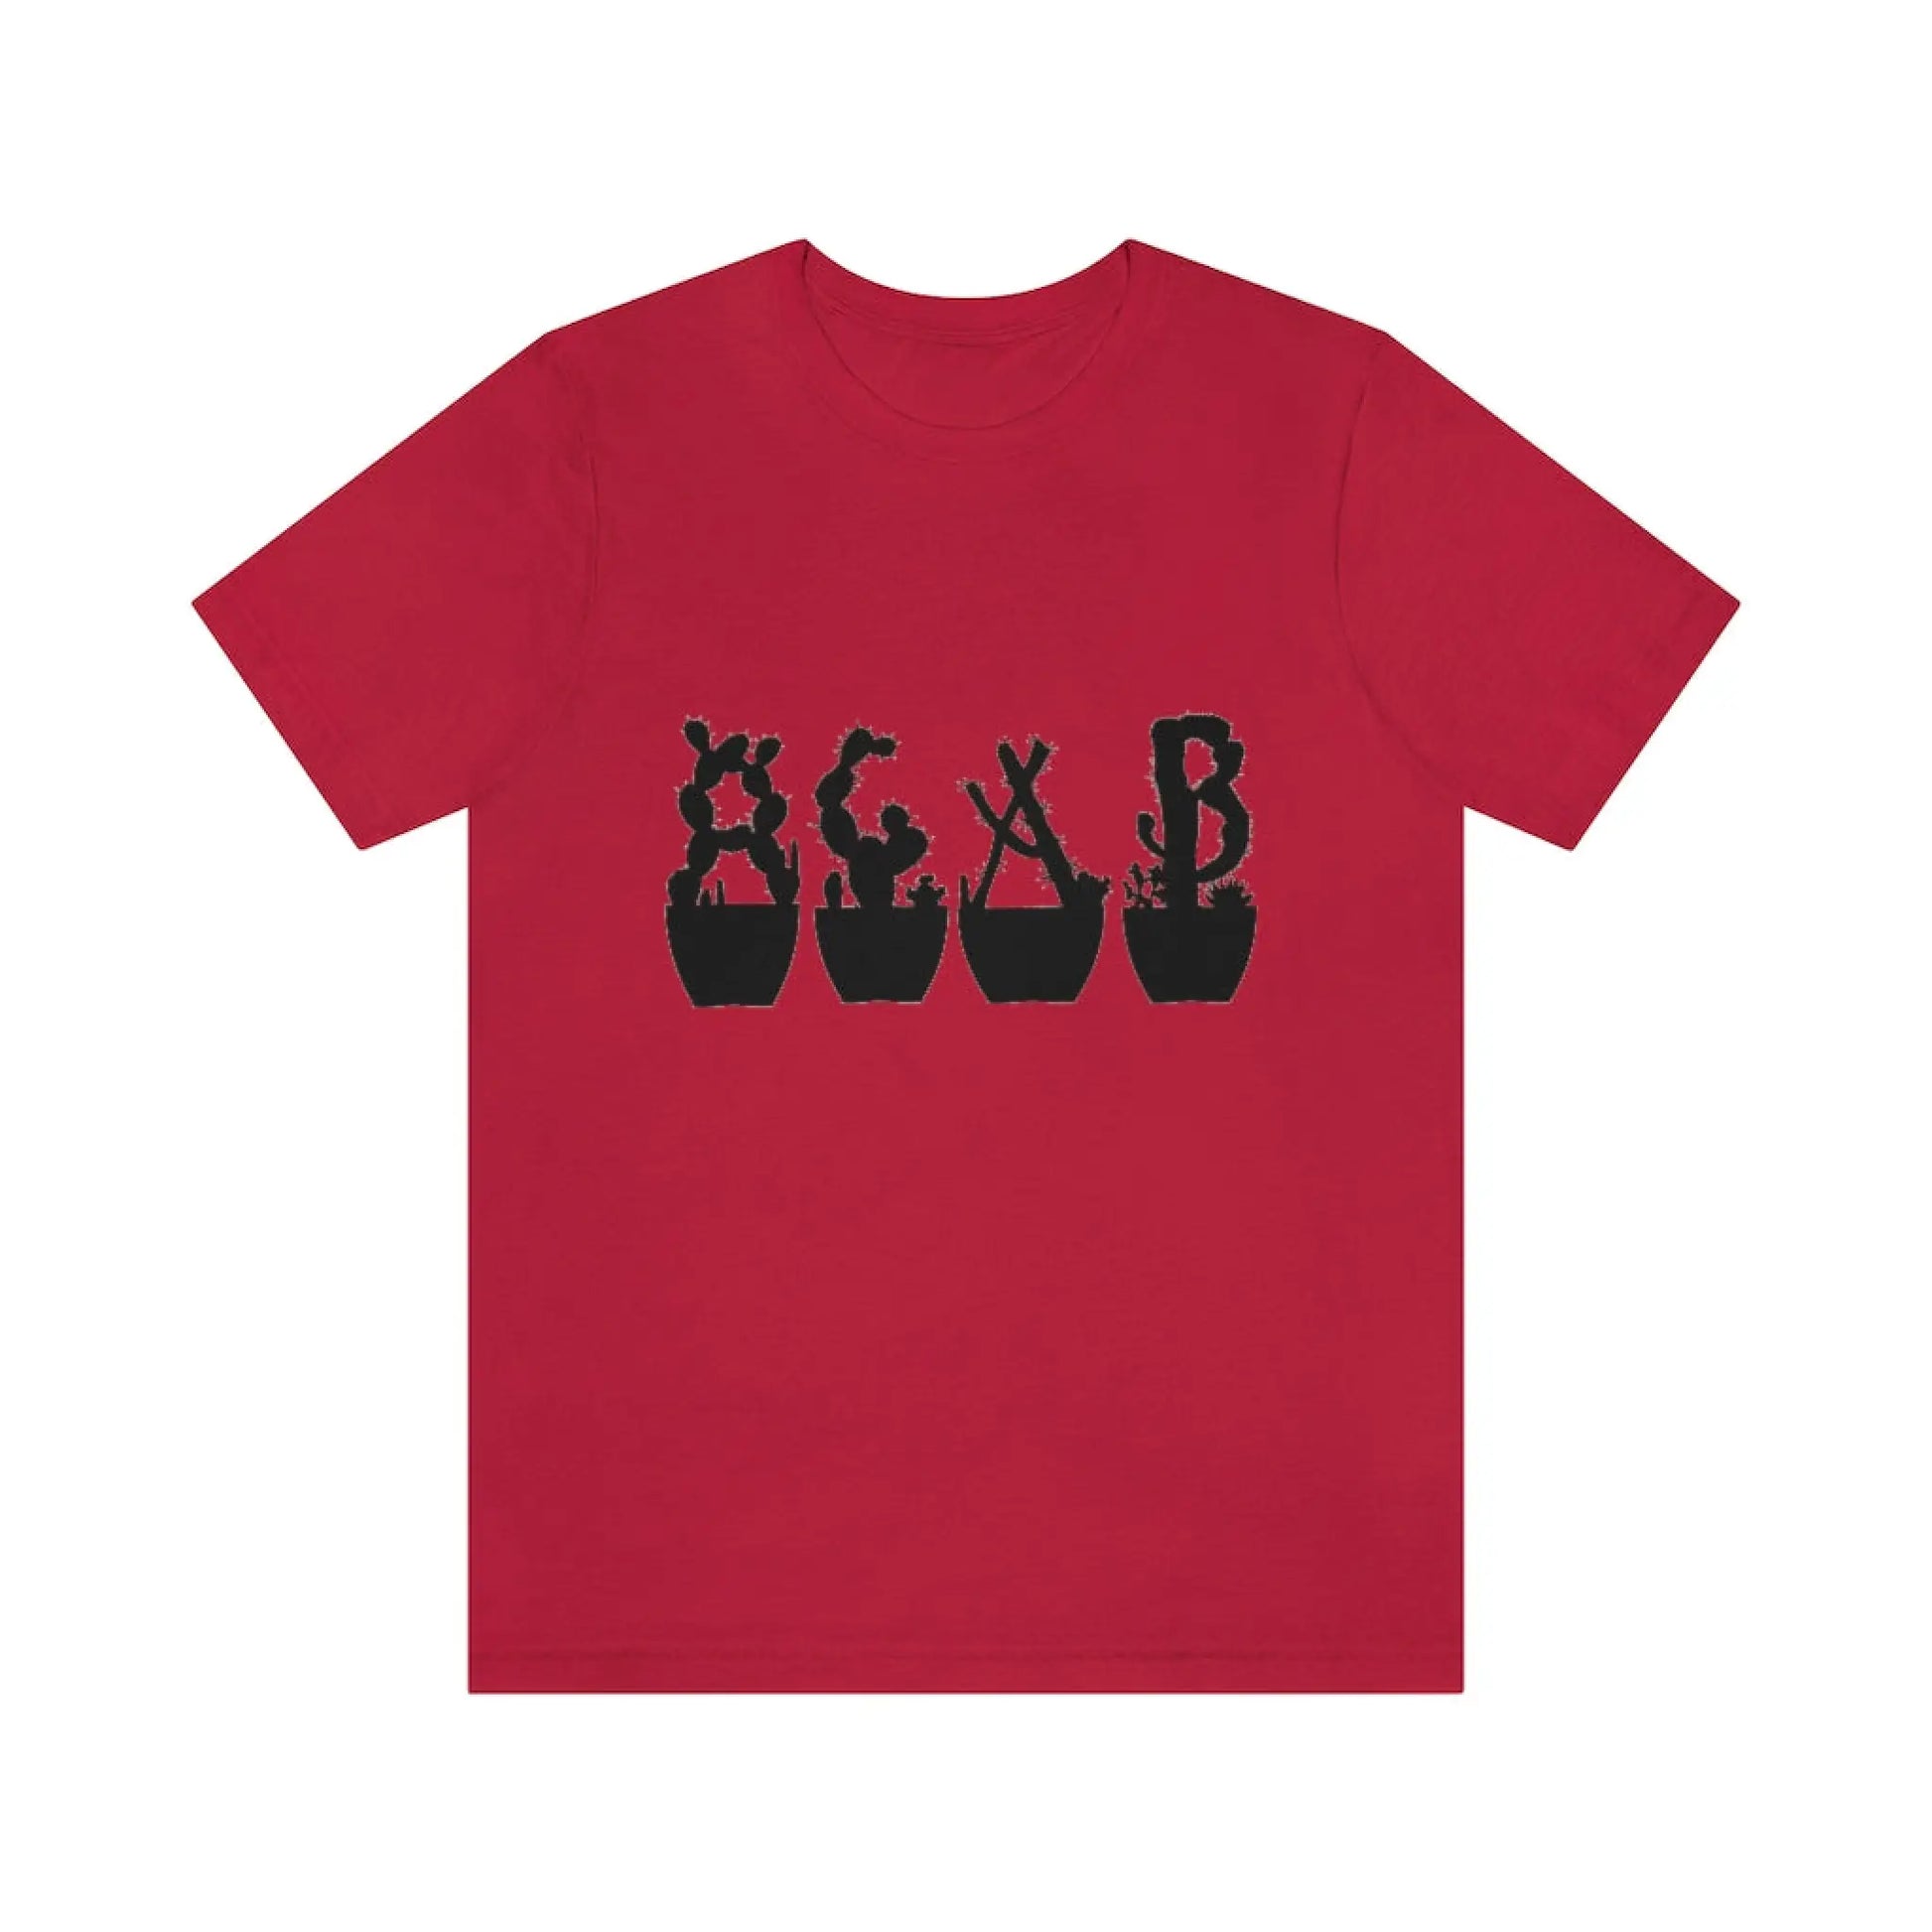 Shirts - Just Beautiful Cactuses - Red / S - T-Shirt